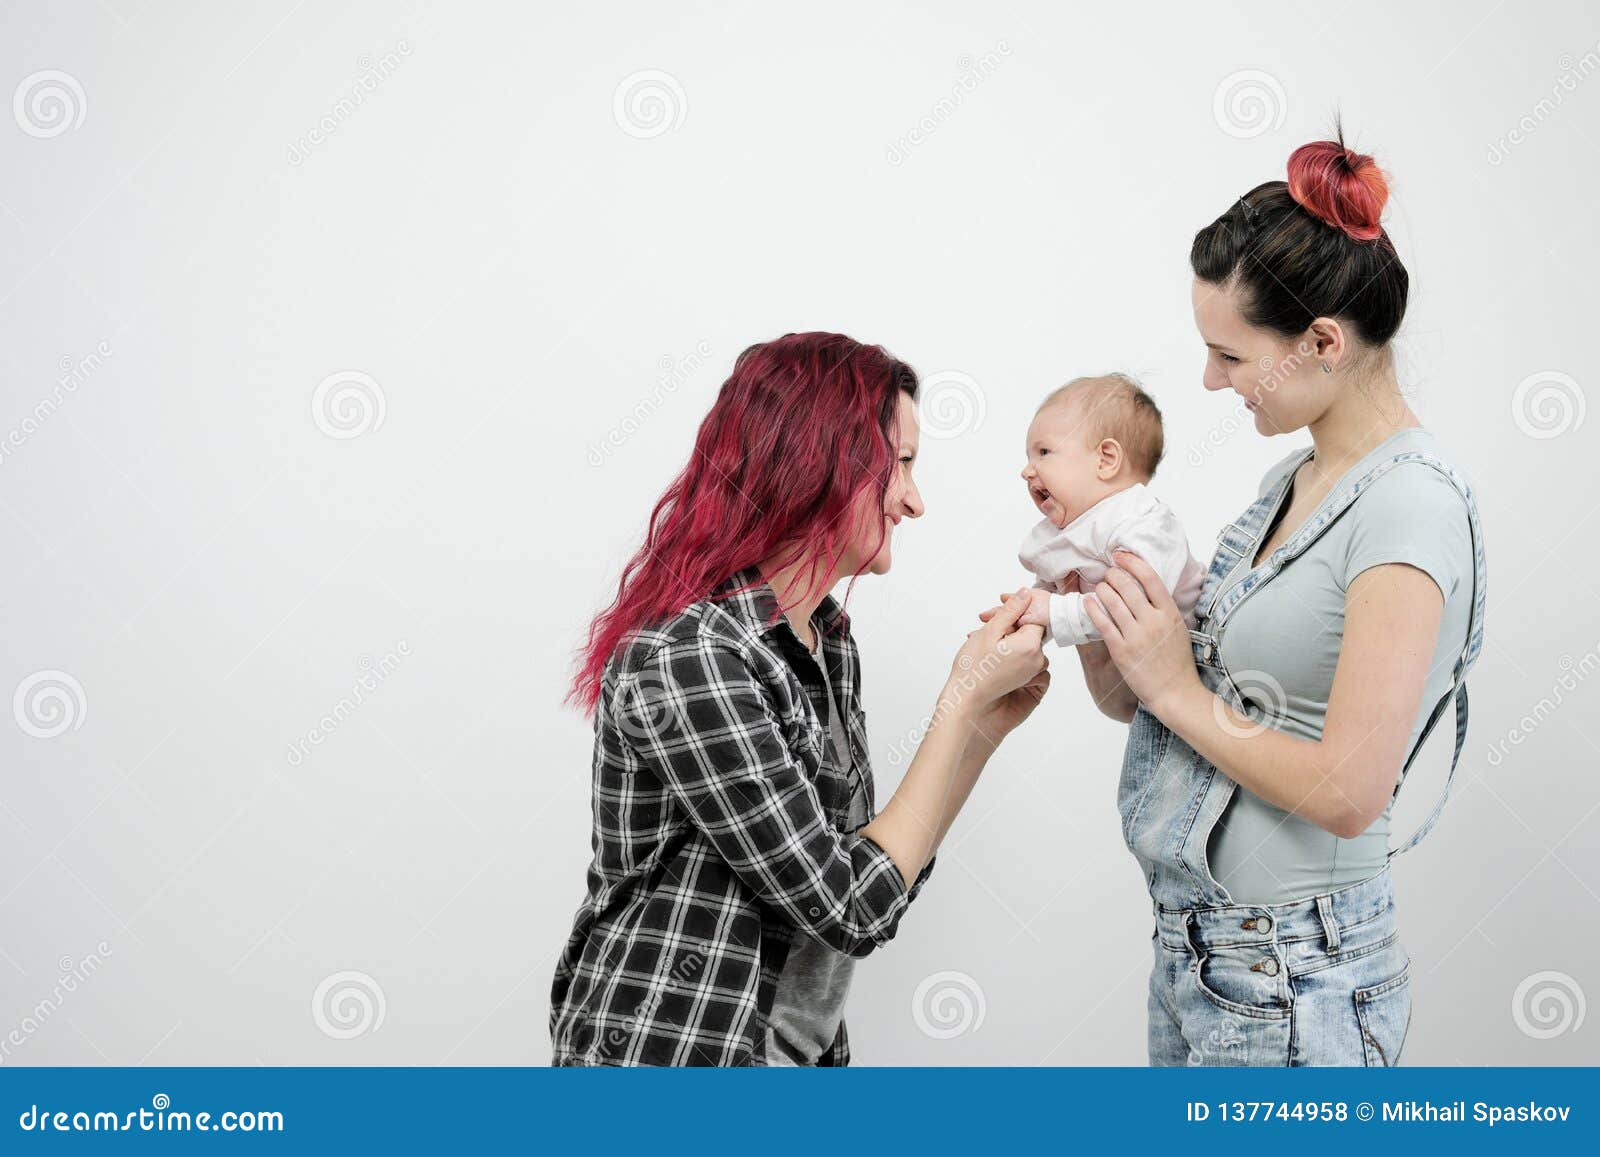 Two Young Women with a Baby on a White Background pic